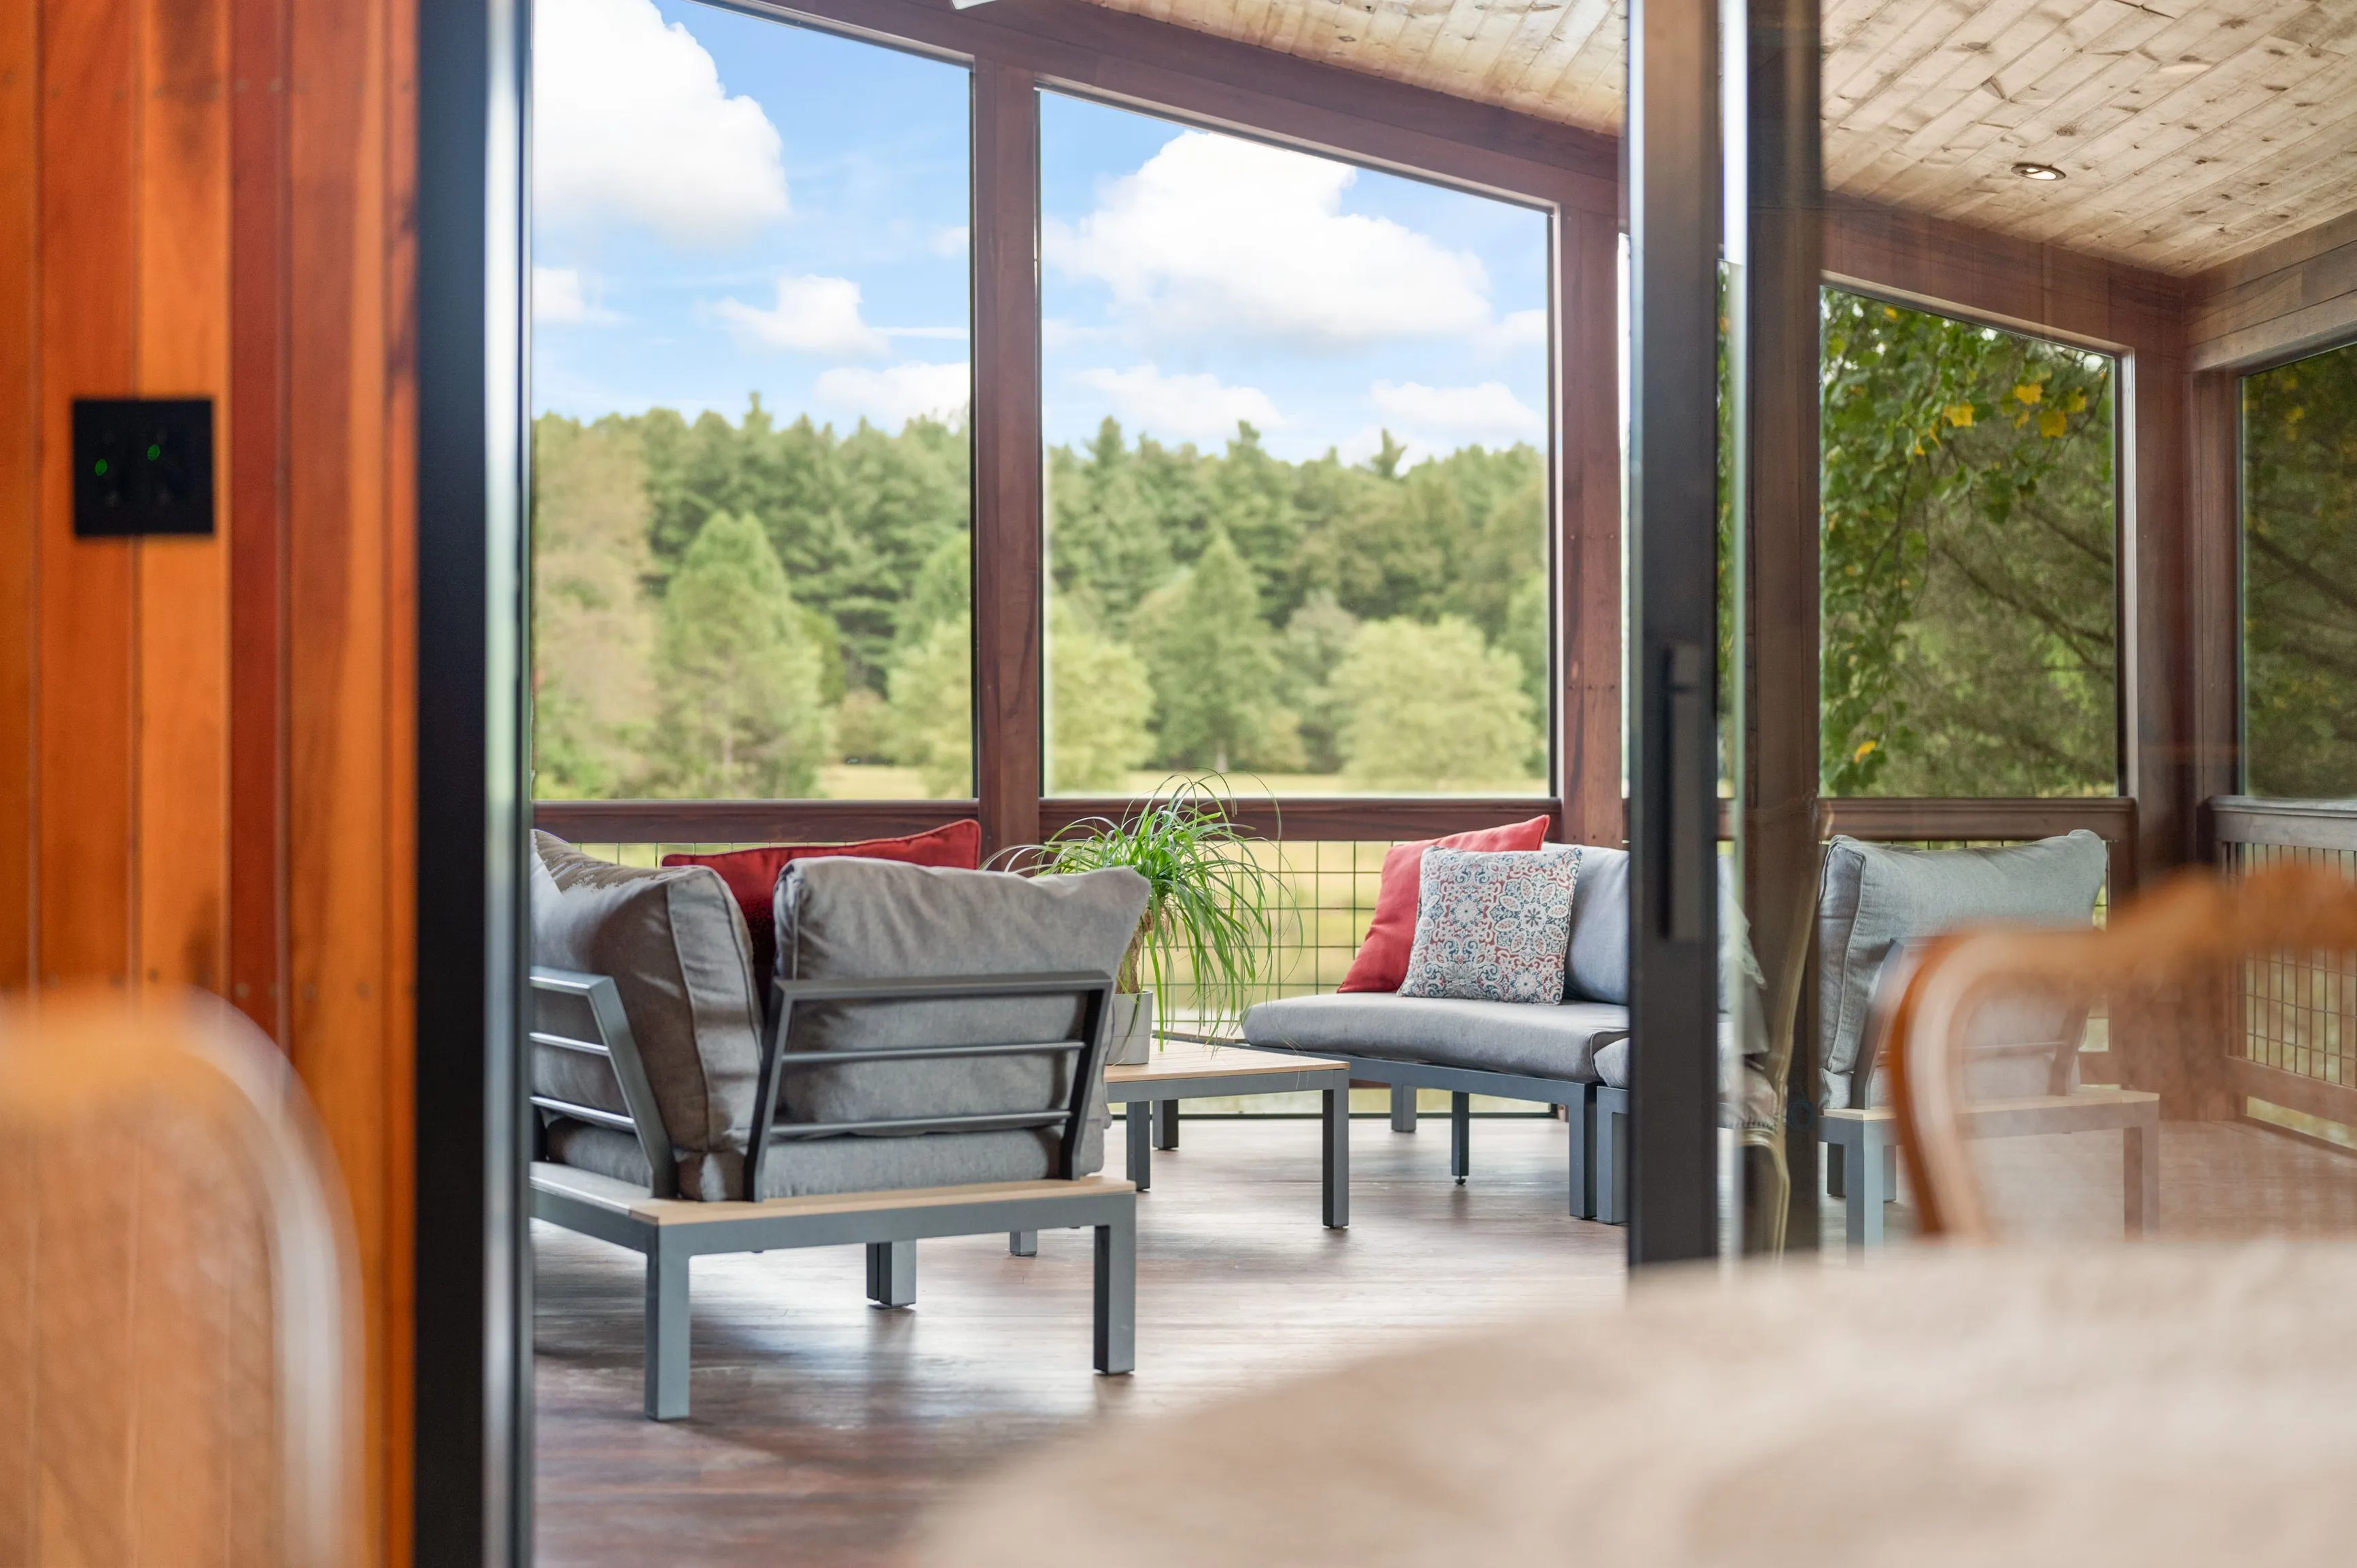 View from an open door of a cozy sunroom with modern furniture and large windows overlooking a lush forest.